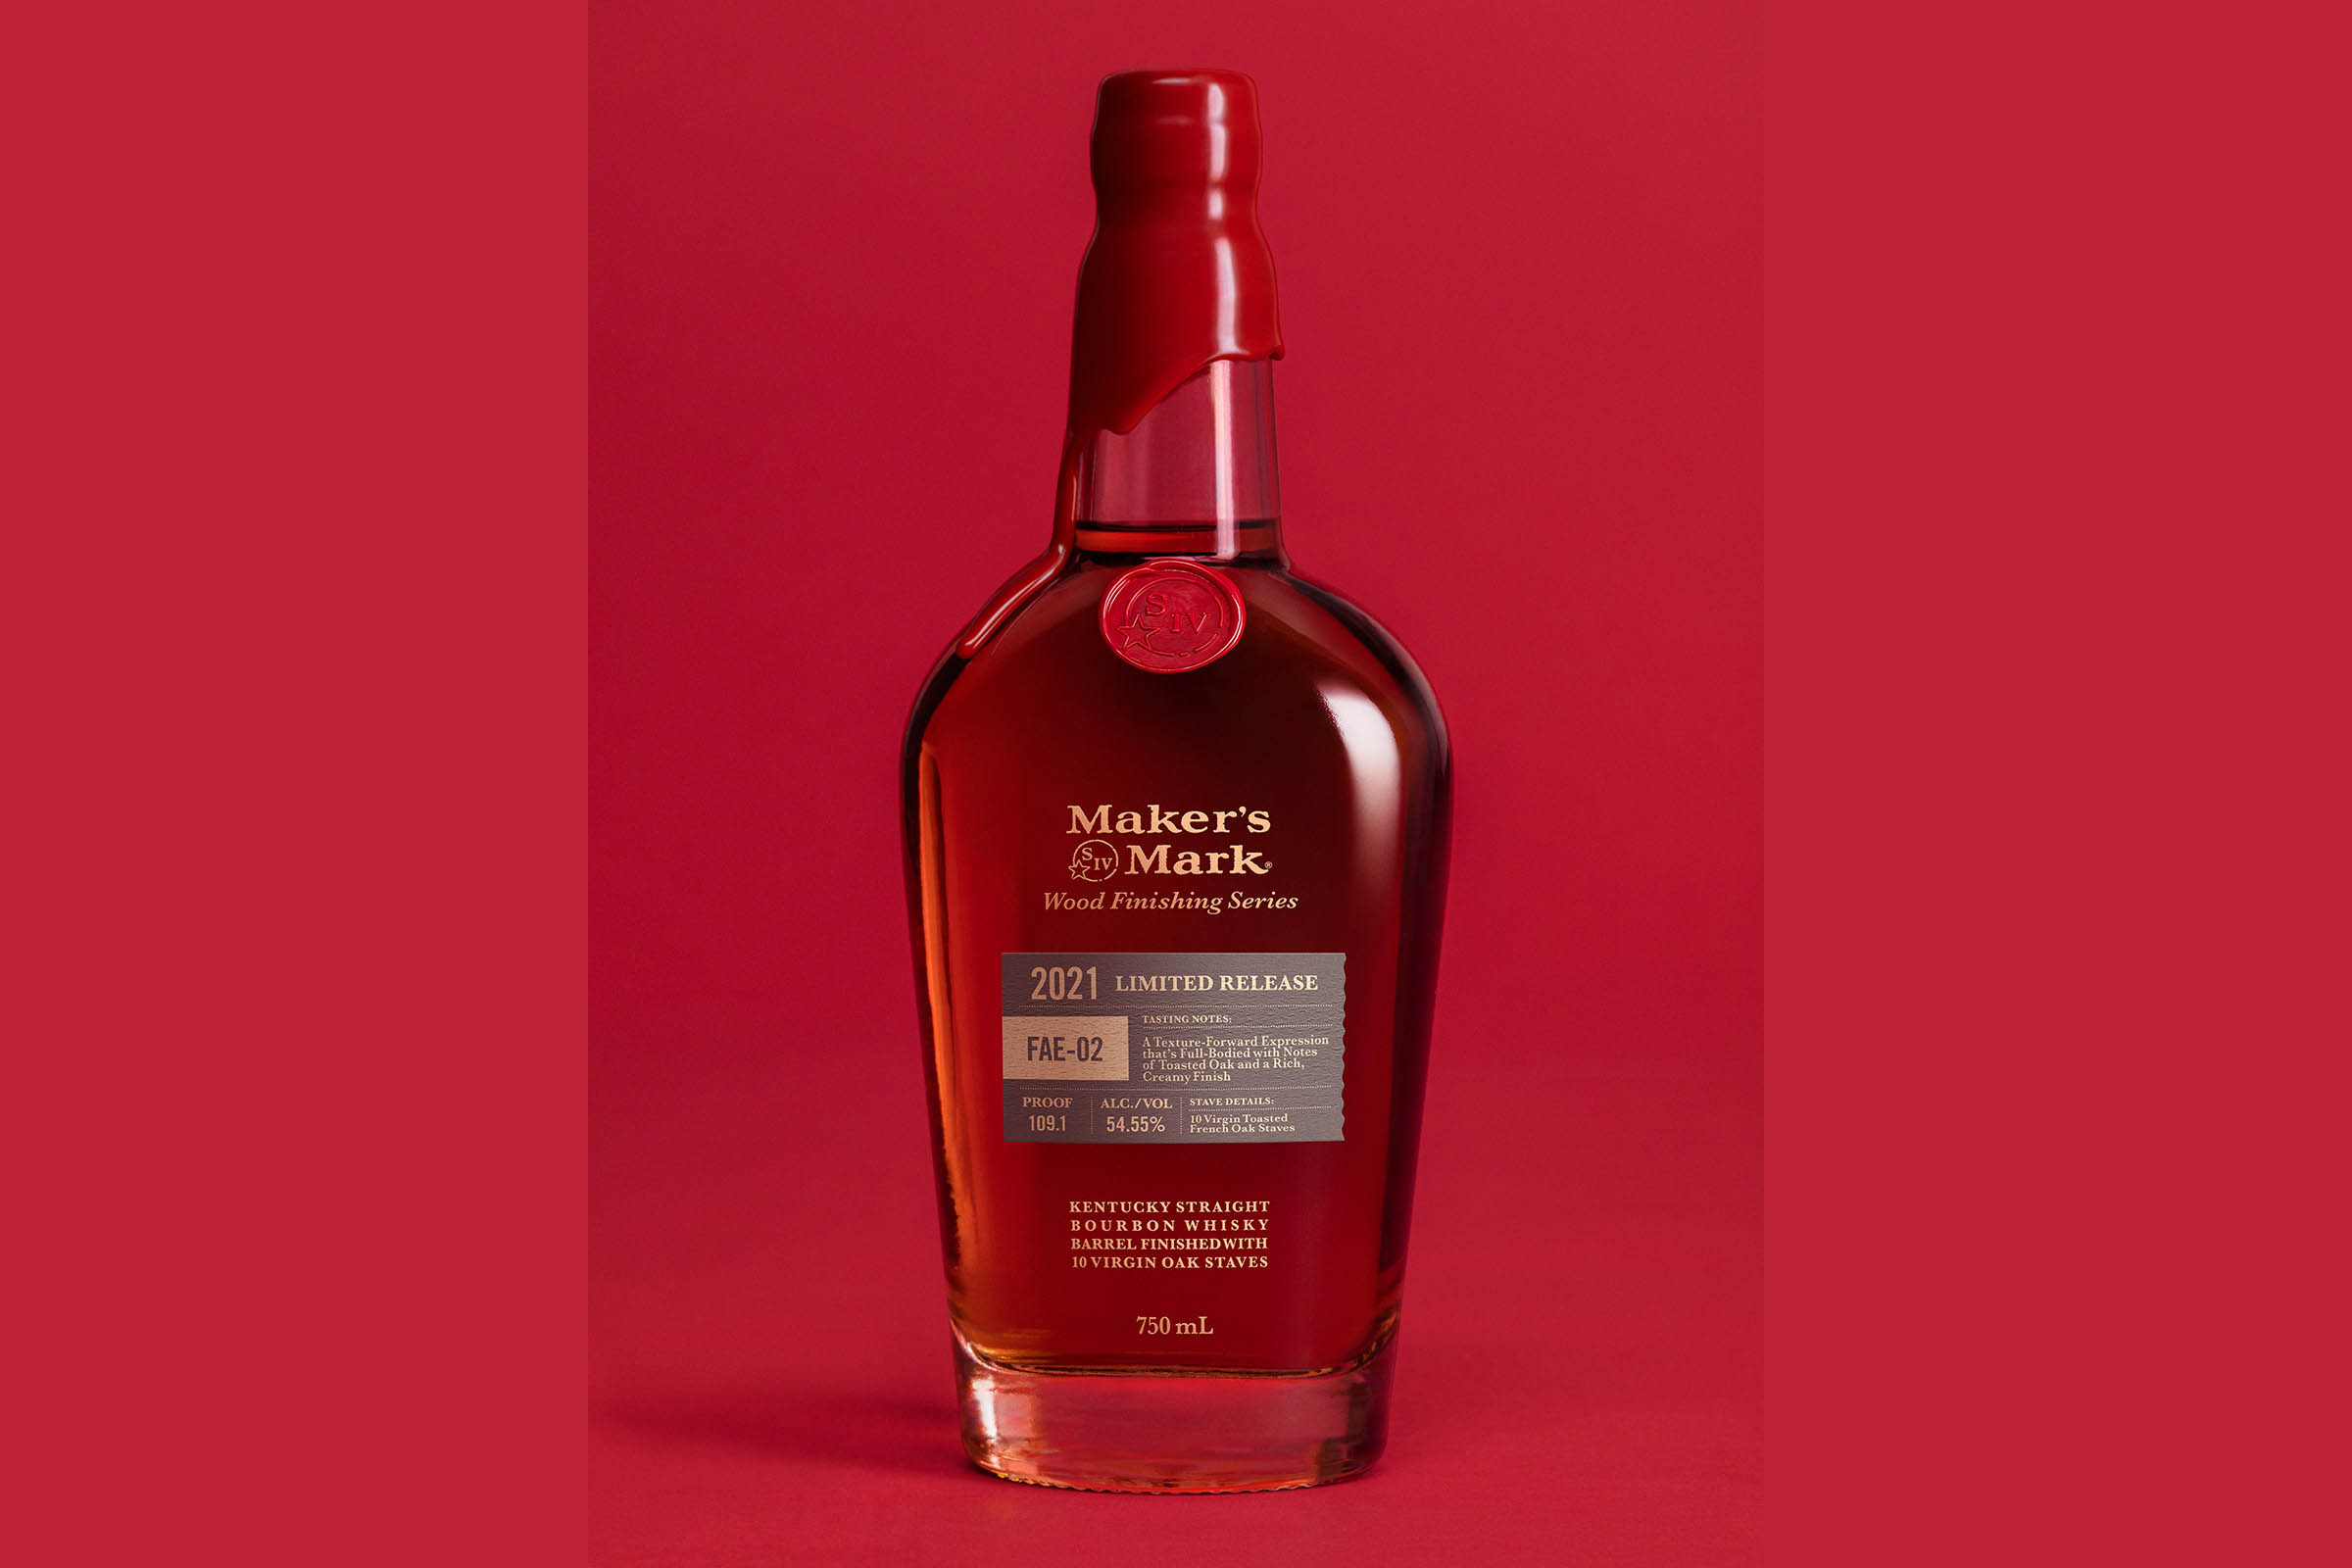 Maker’s Mark Wood-Finishing Series 2021 Limited Release FAE-02